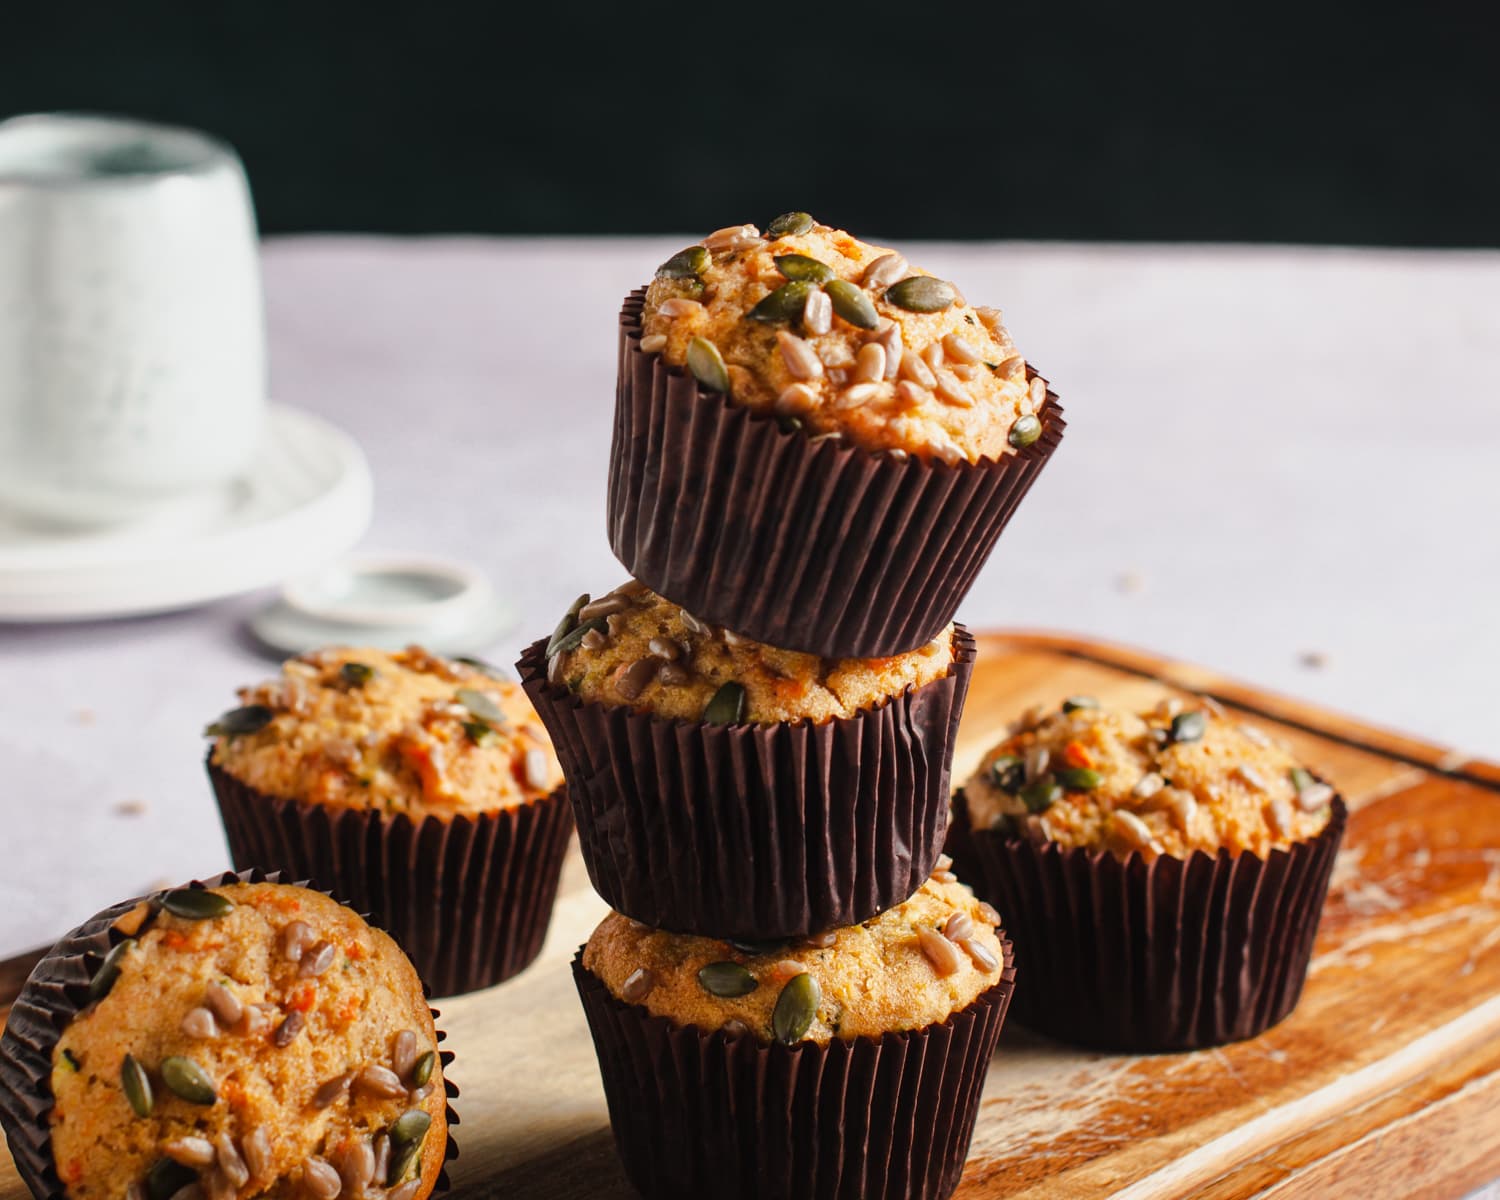 A stack of carrot muffins.